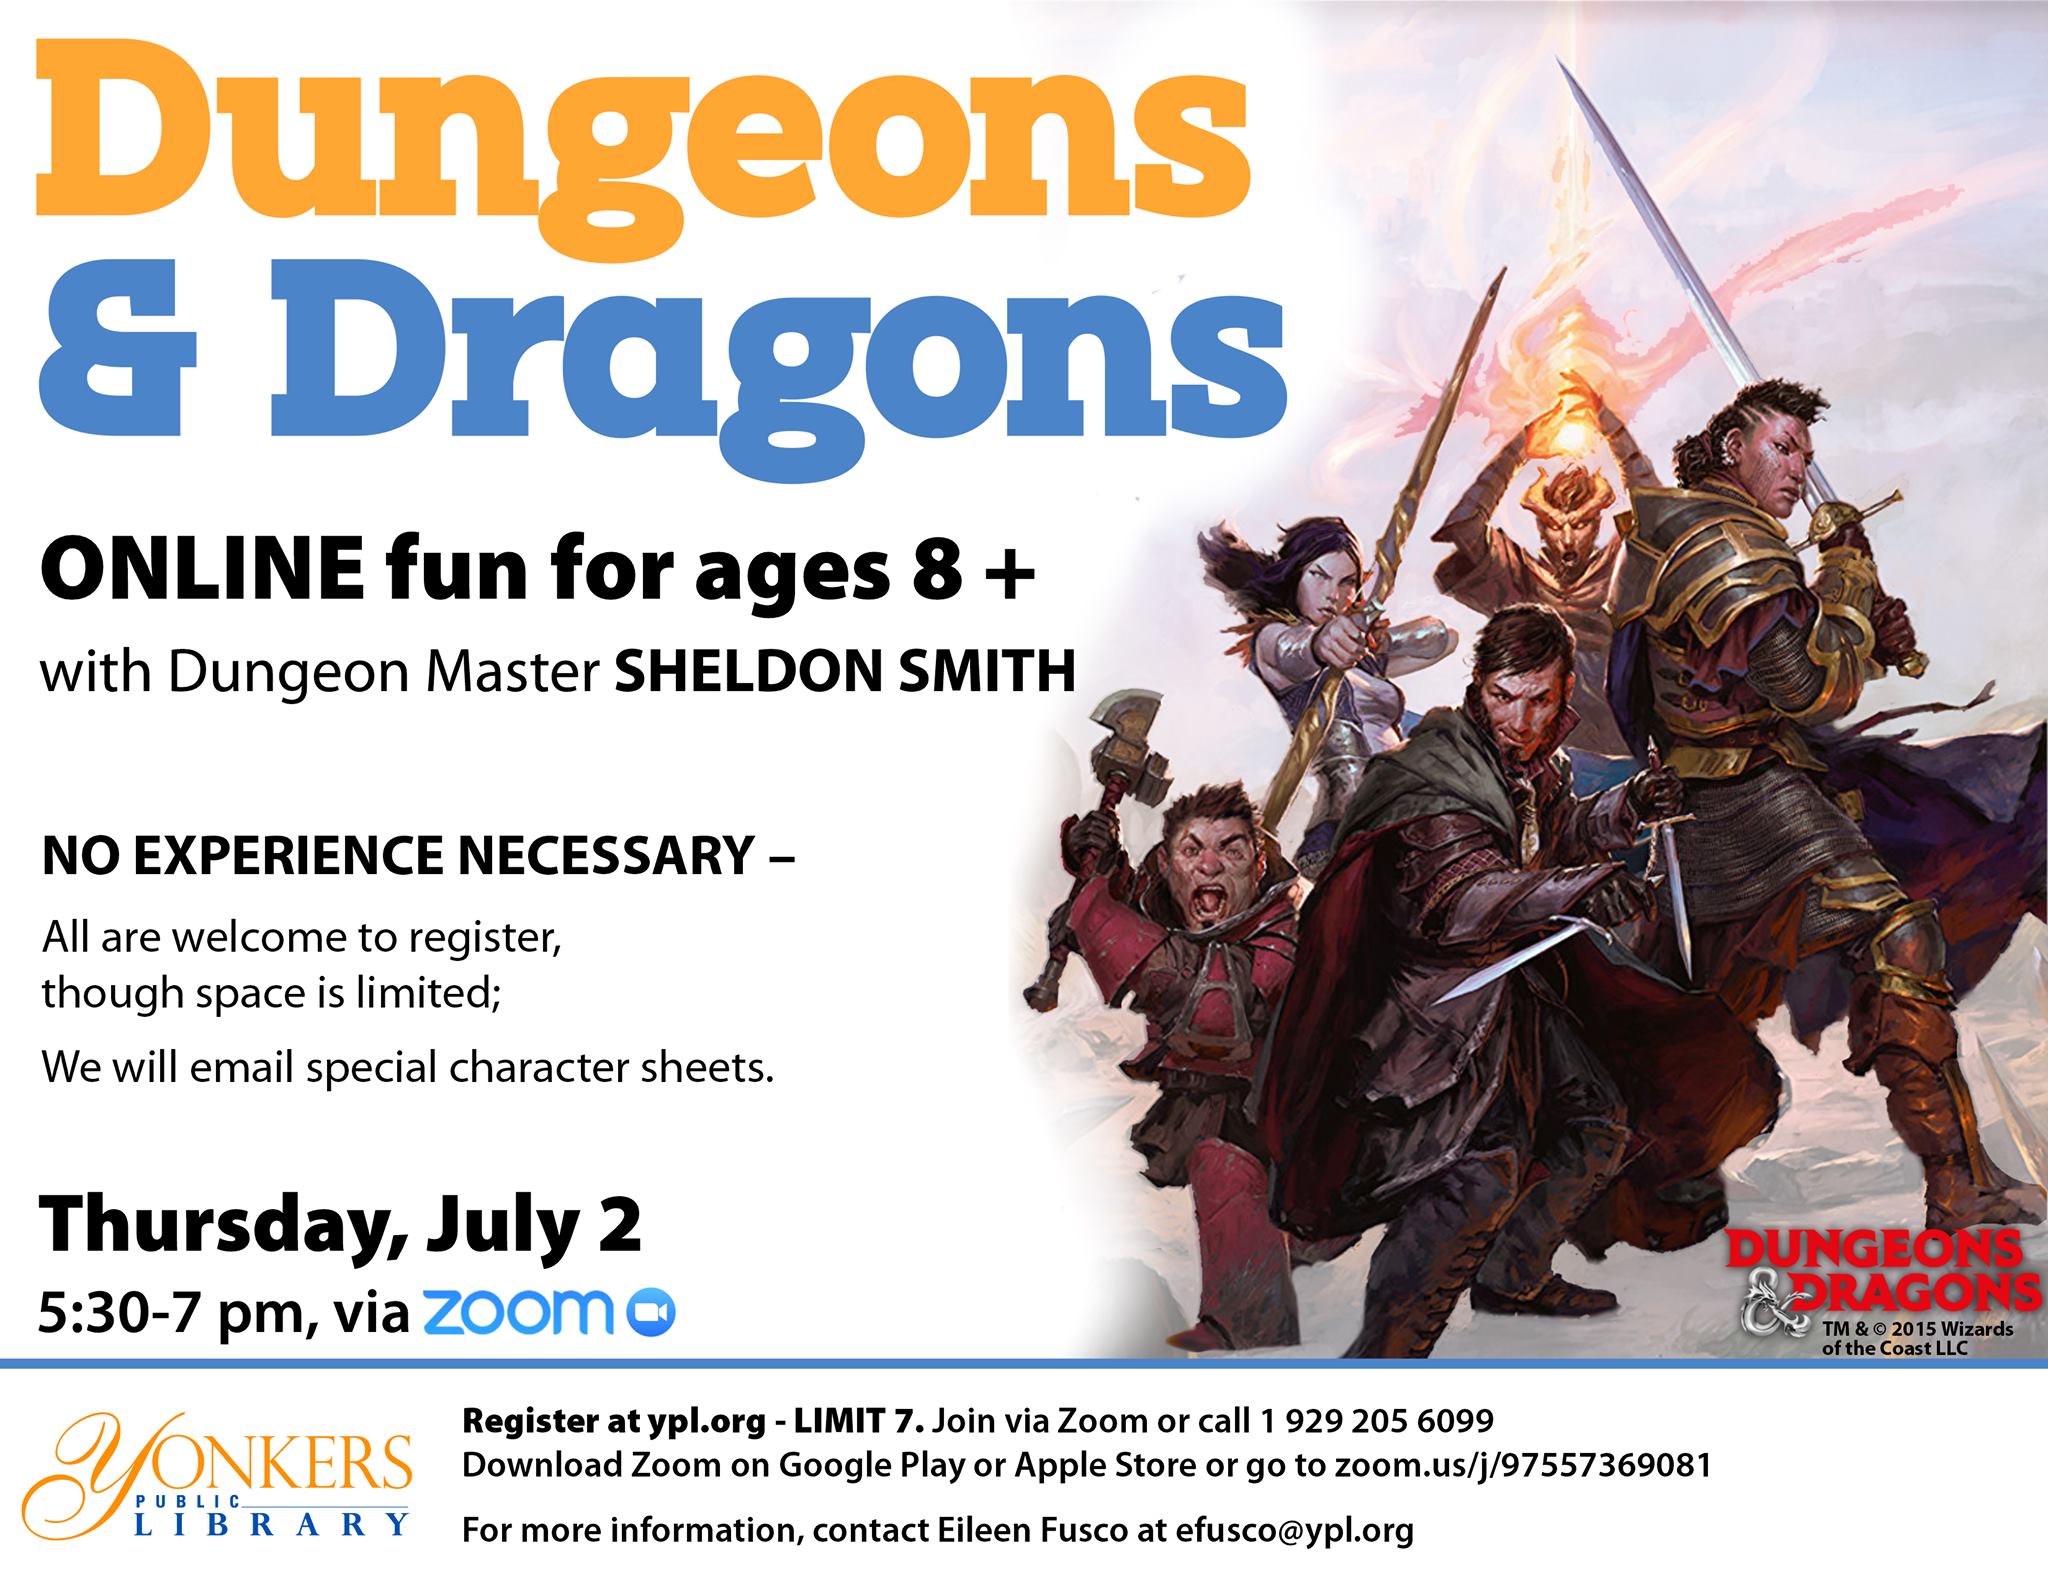 Dungeons and Dragons image